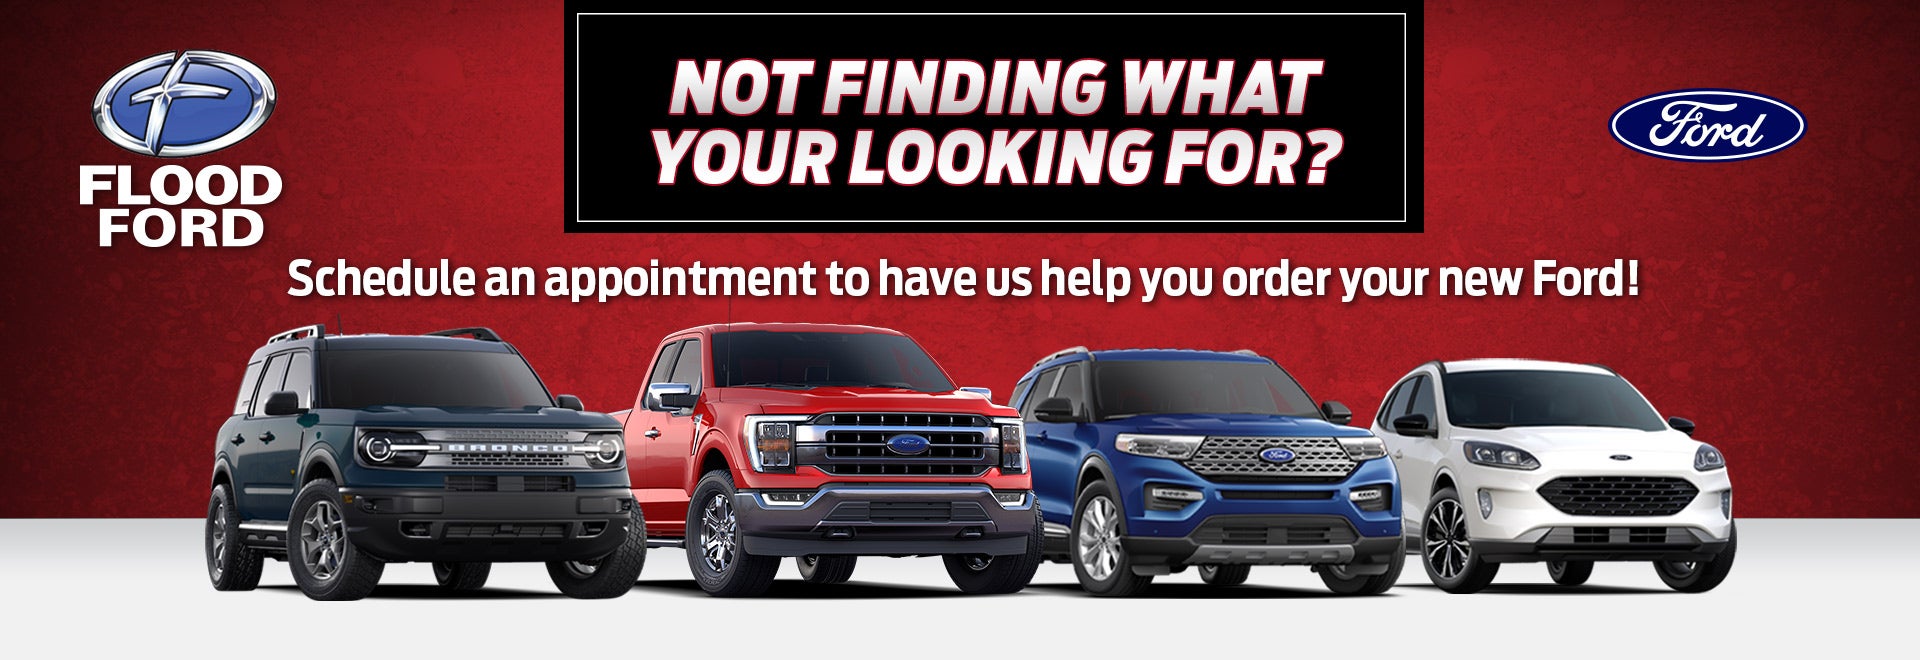 Find your next Ford!